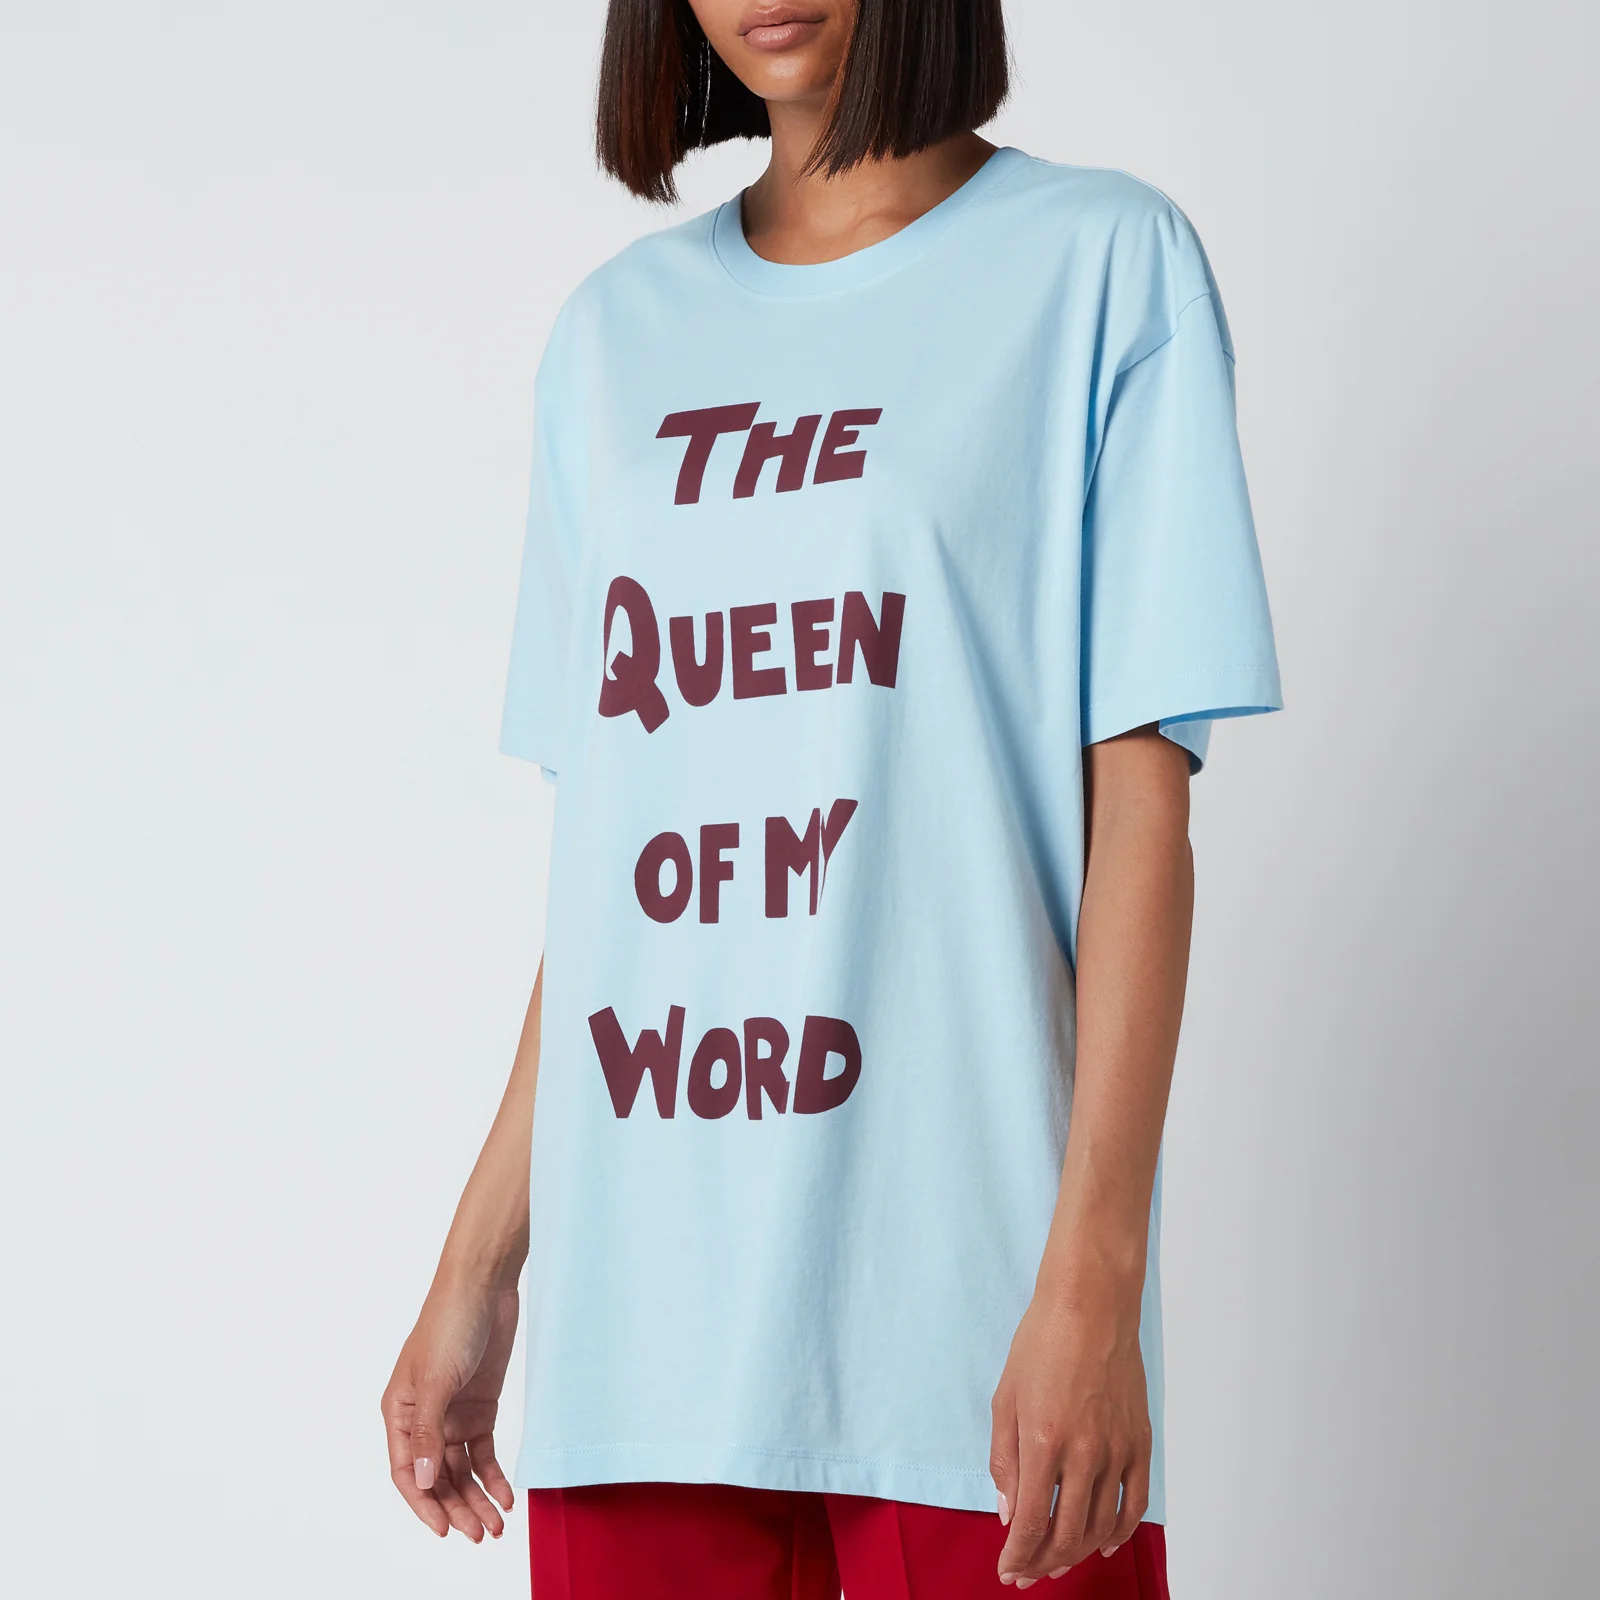 Bella Freud Women's The Queen Of My World T-Shirt - Blue Image 1